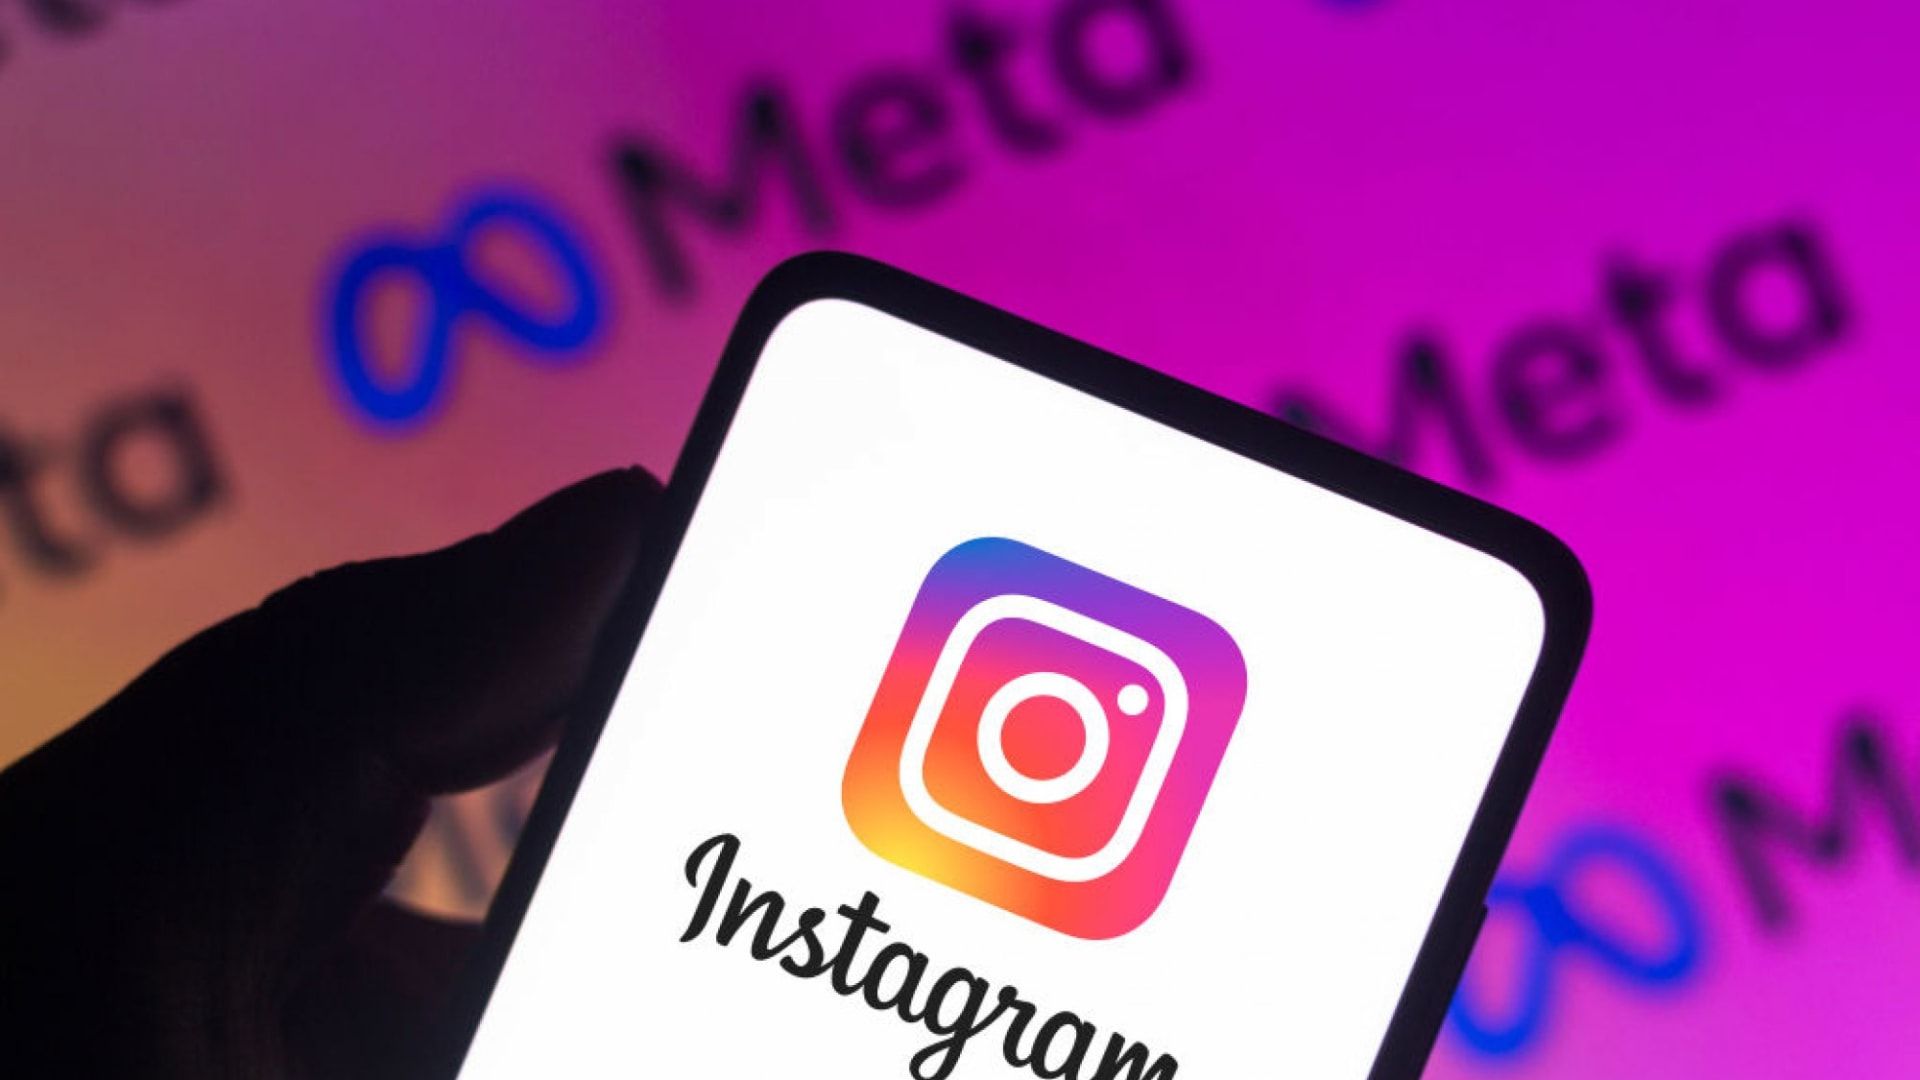 In this article, we are going to be covering the new Change.org Instagram petition to remove the suggested posts from users' feeds.